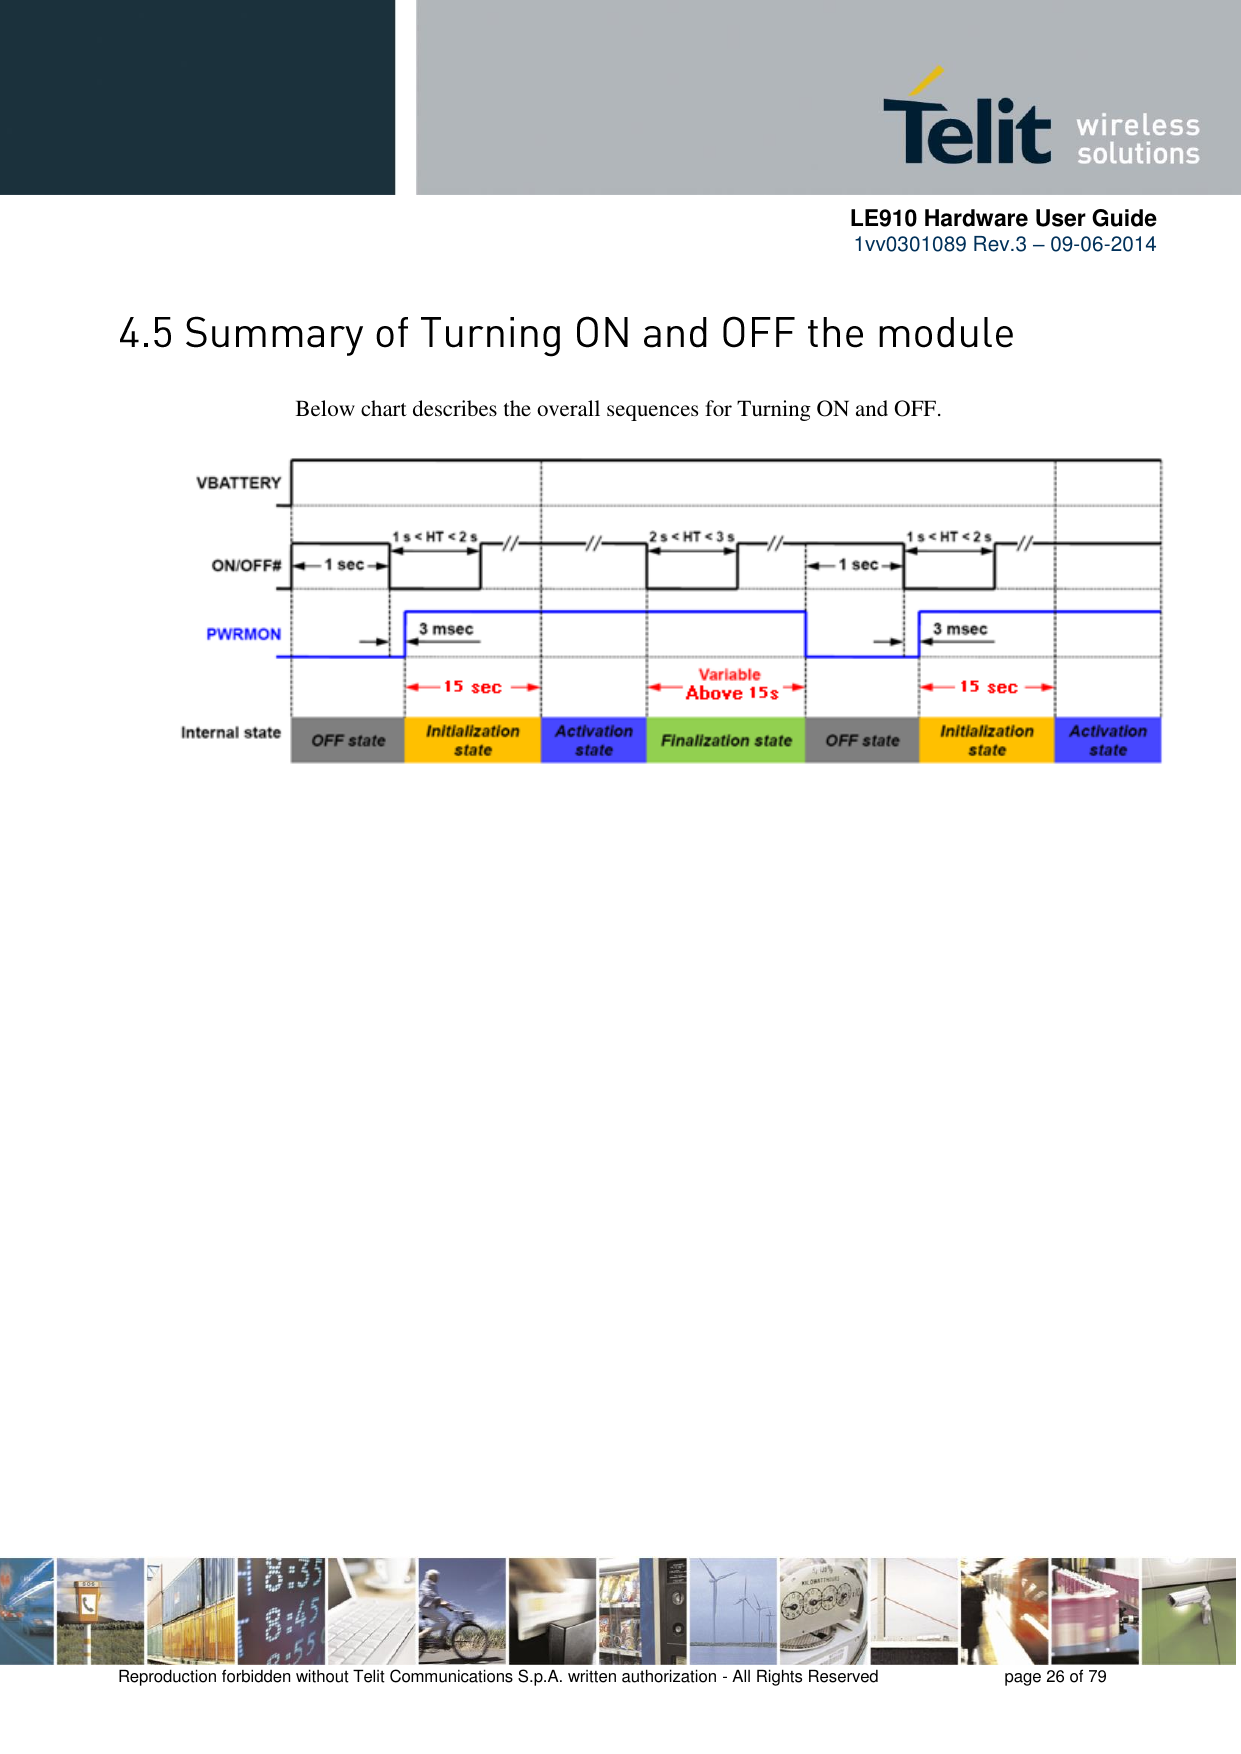      LE910 Hardware User Guide 1vv0301089 Rev.3 – 09-06-2014    Reproduction forbidden without Telit Communications S.p.A. written authorization - All Rights Reserved    page 26 of 79   Below chart describes the overall sequences for Turning ON and OFF.                 